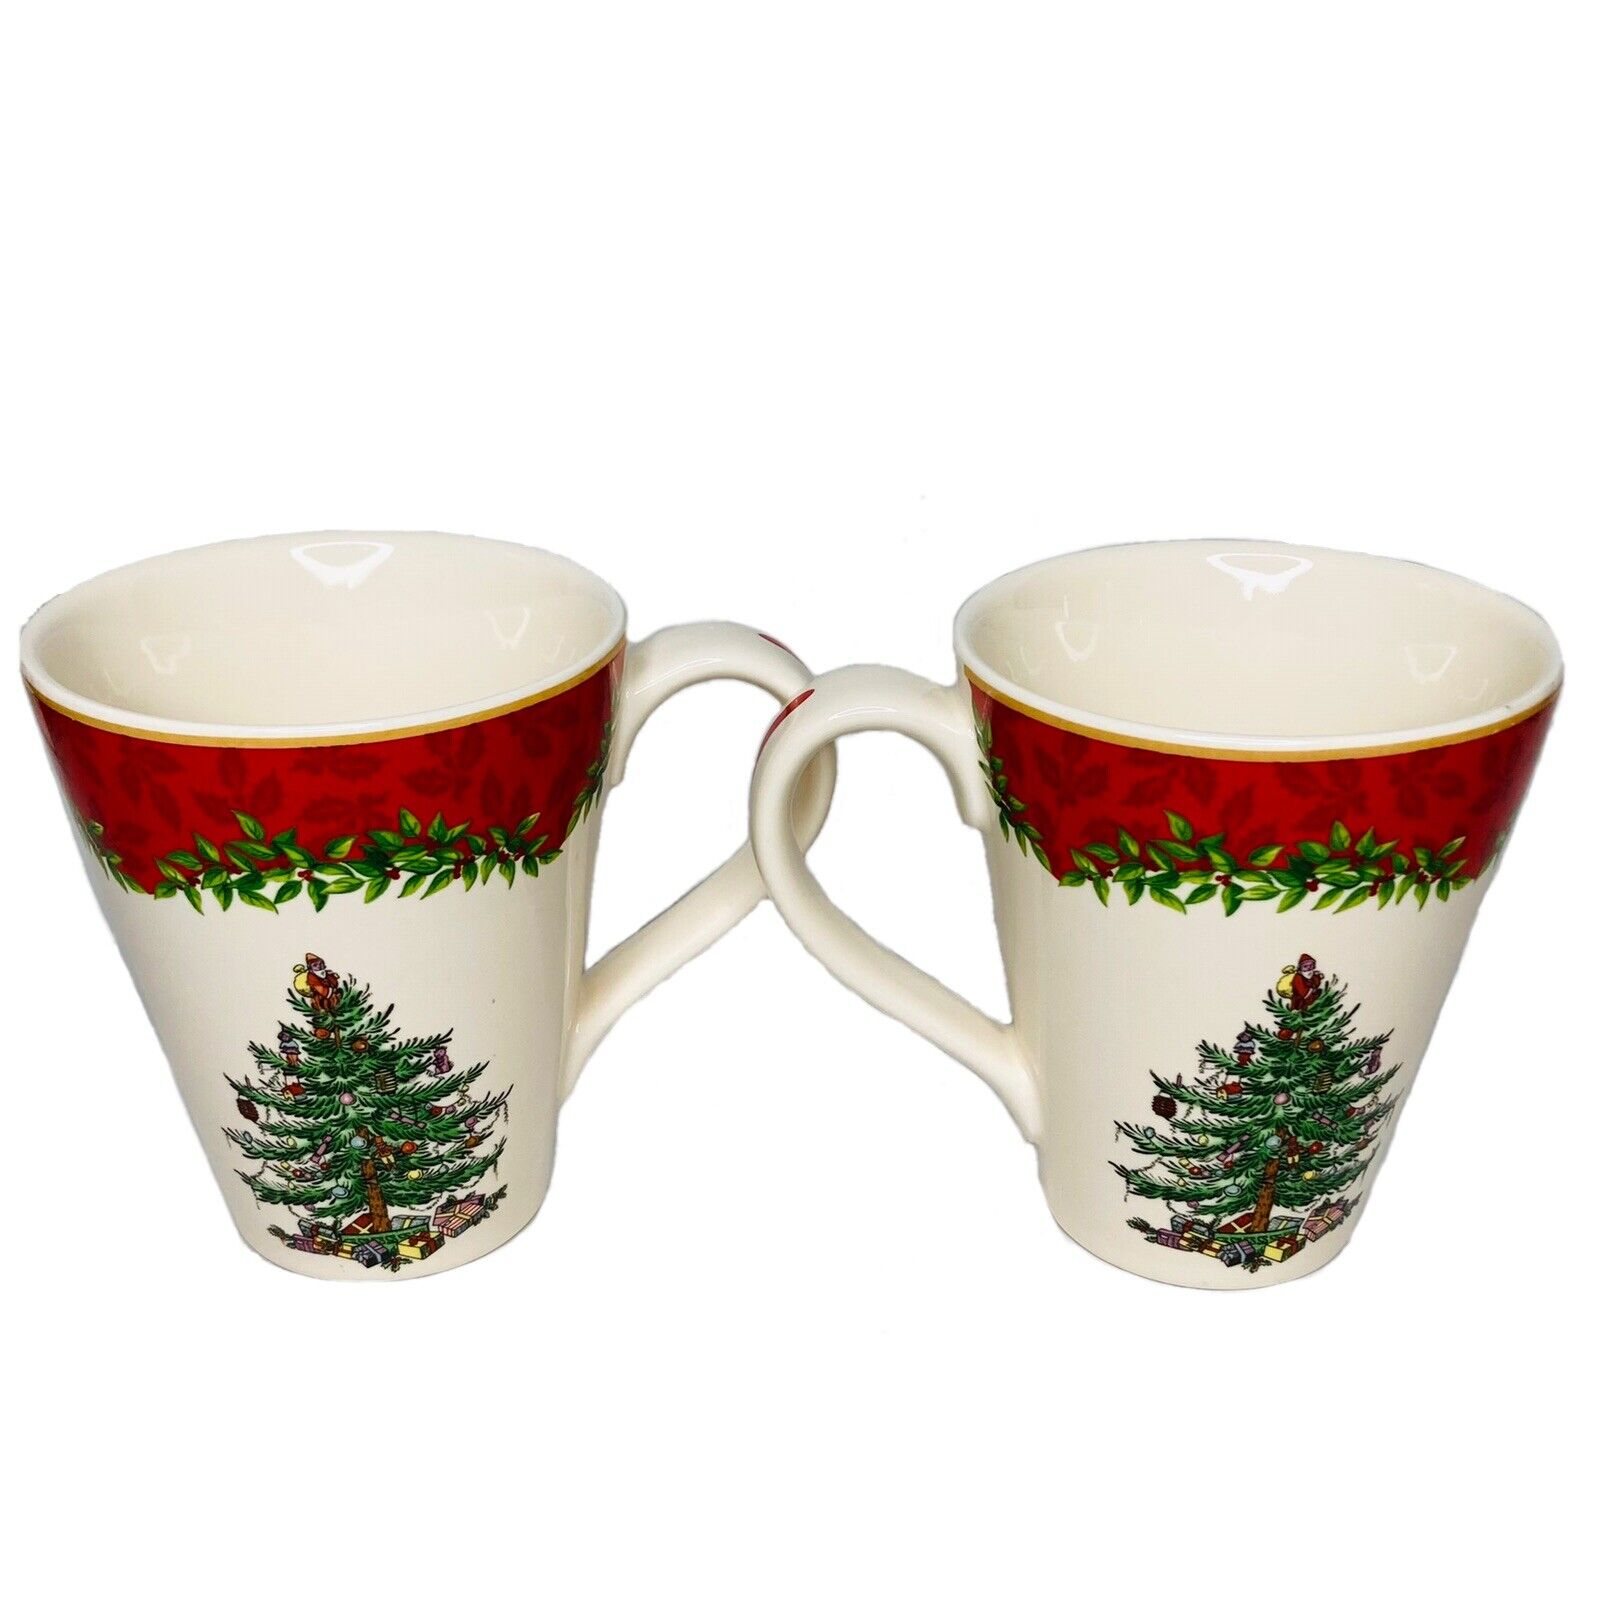 Spode Christmas Tree 12 oz Coffee Mugs/Cups  2013 Annual Collection Set Of 2